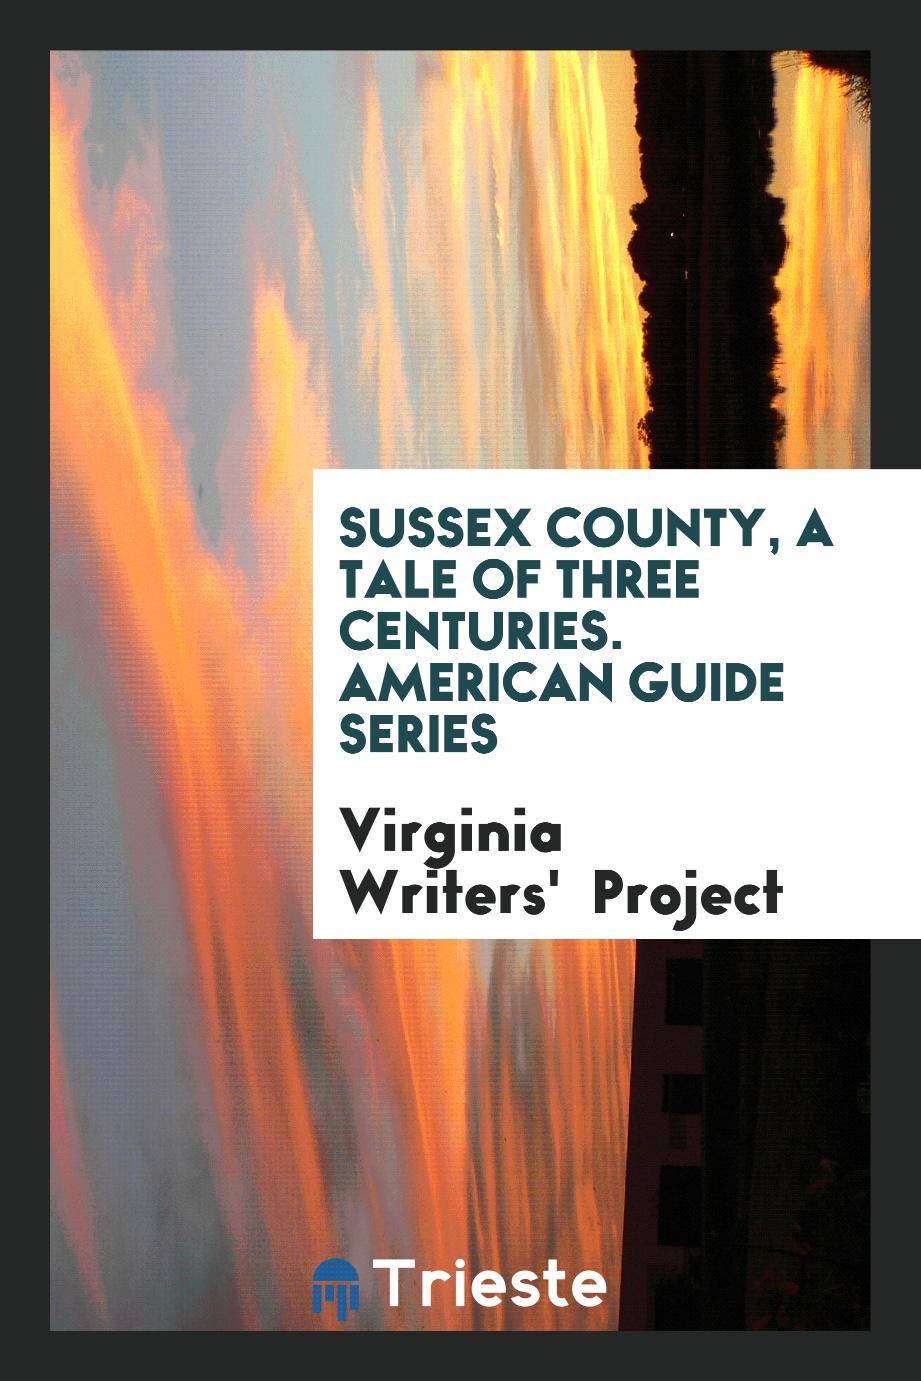 Virginia Writers'  Project - Sussex County, a Tale of Three Centuries. American Guide Series